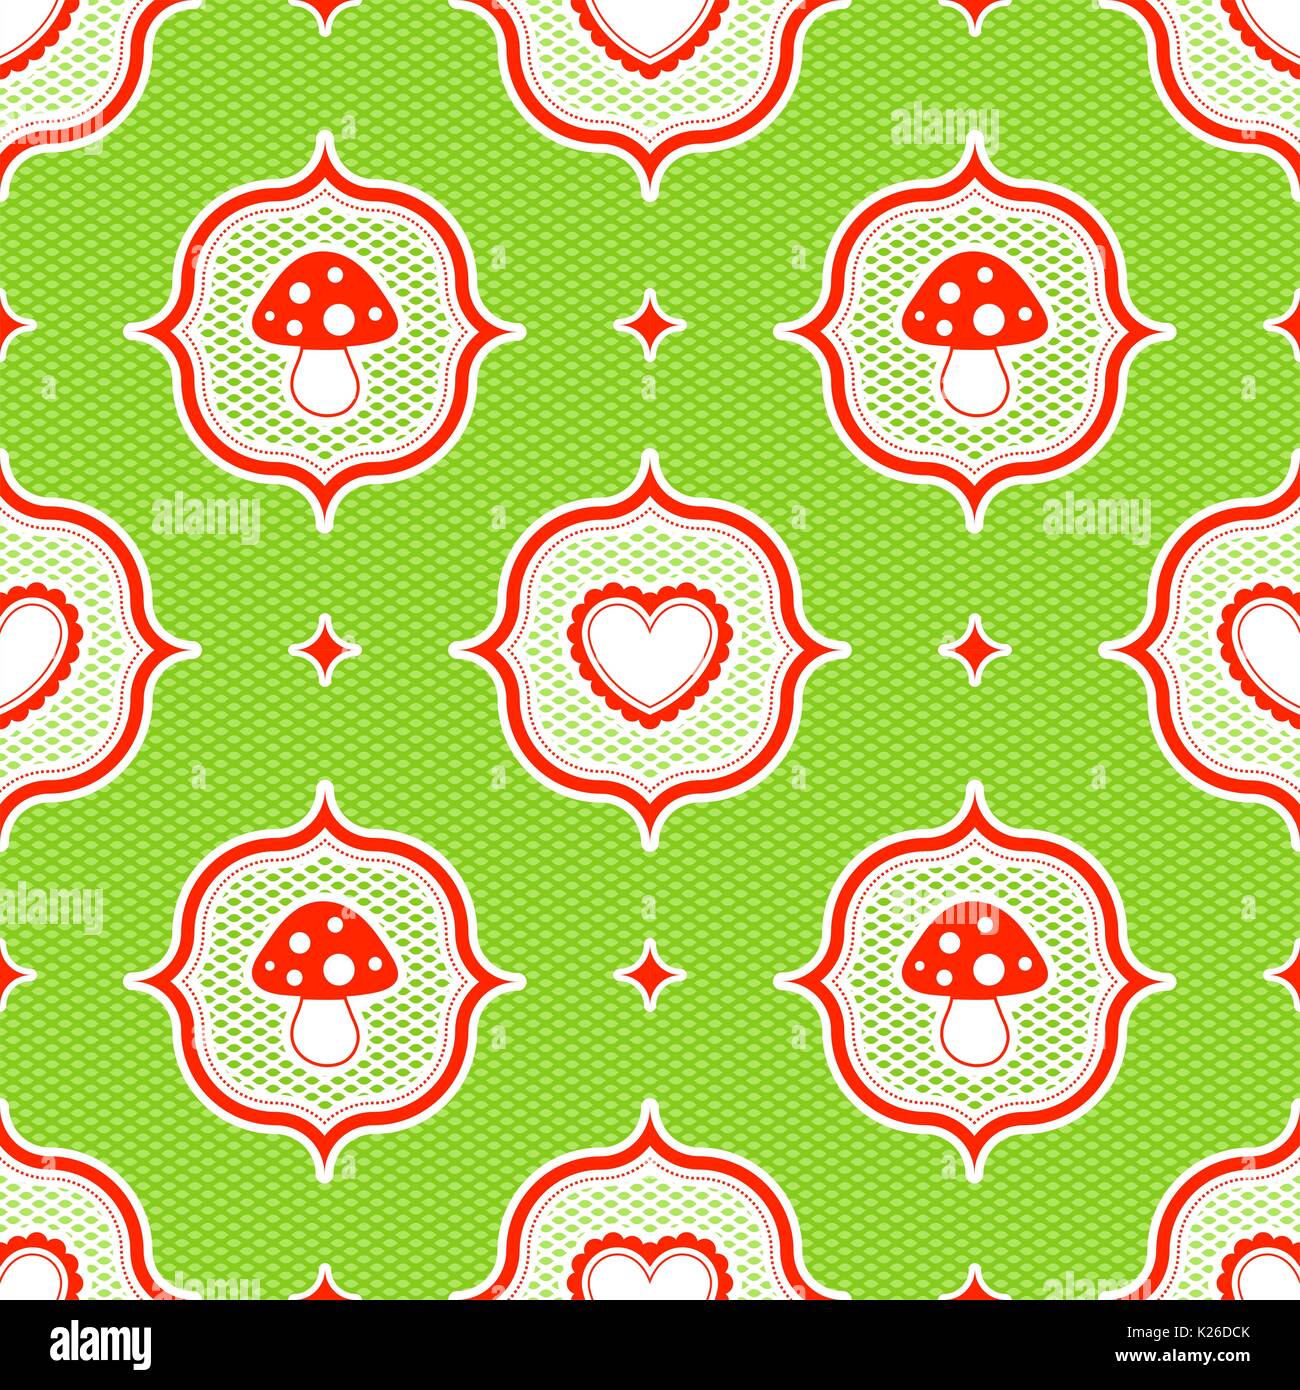 Green polka dot pattern with red toadstool mushroom and heart seamless background illustration Stock Vector